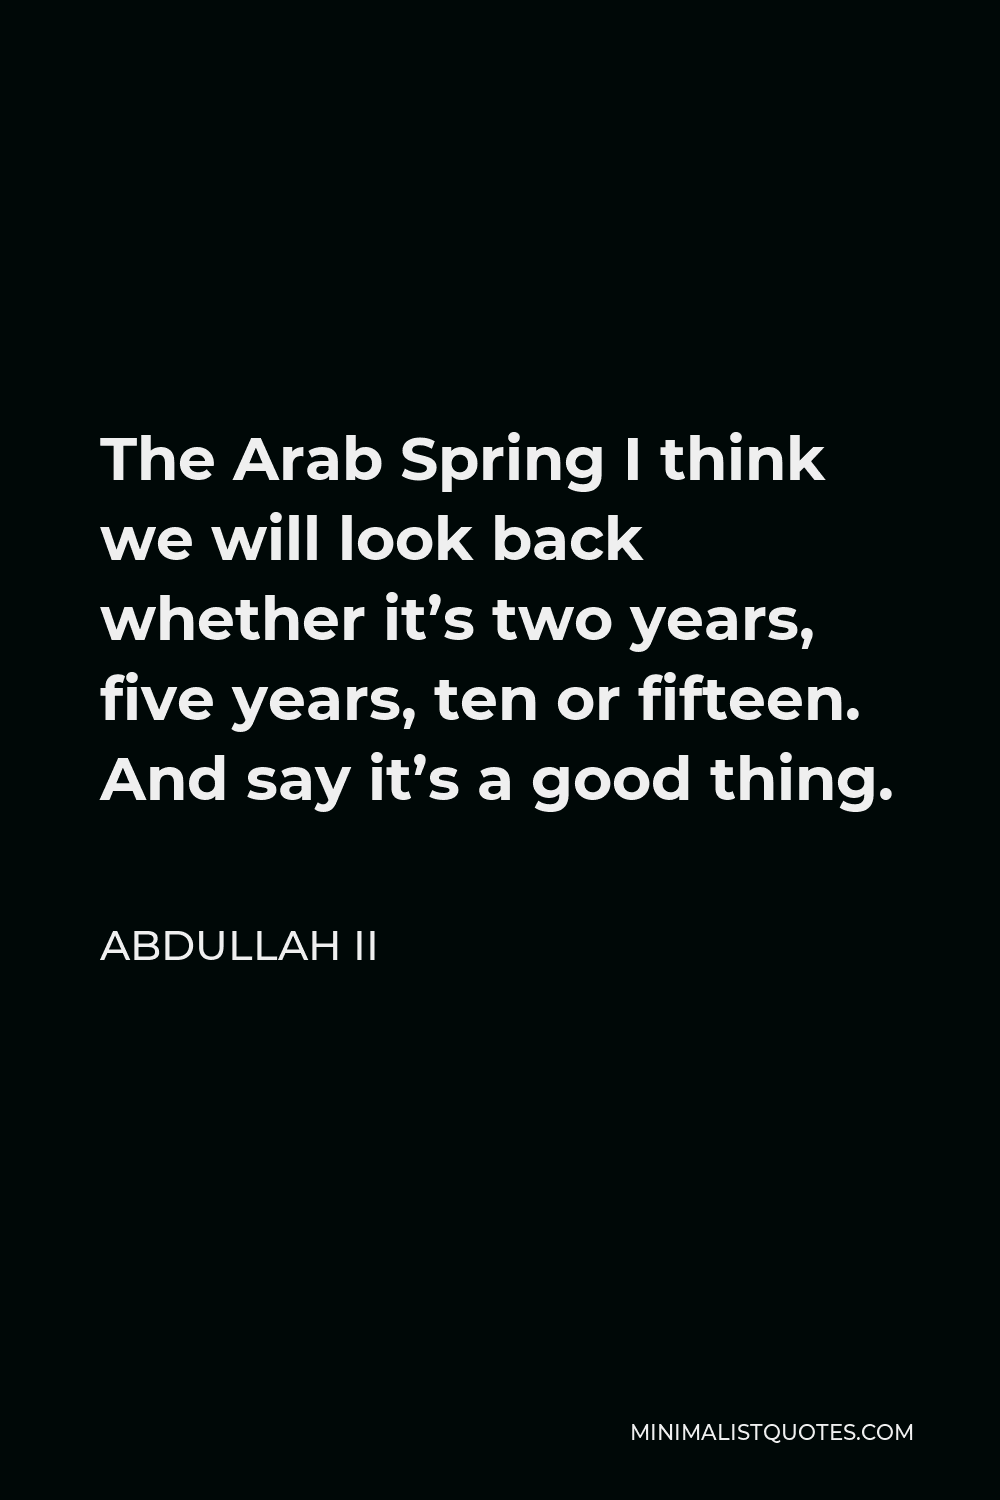 Abdullah II Quote - The Arab Spring I think we will look back whether it’s two years, five years, ten or fifteen. And say it’s a good thing.